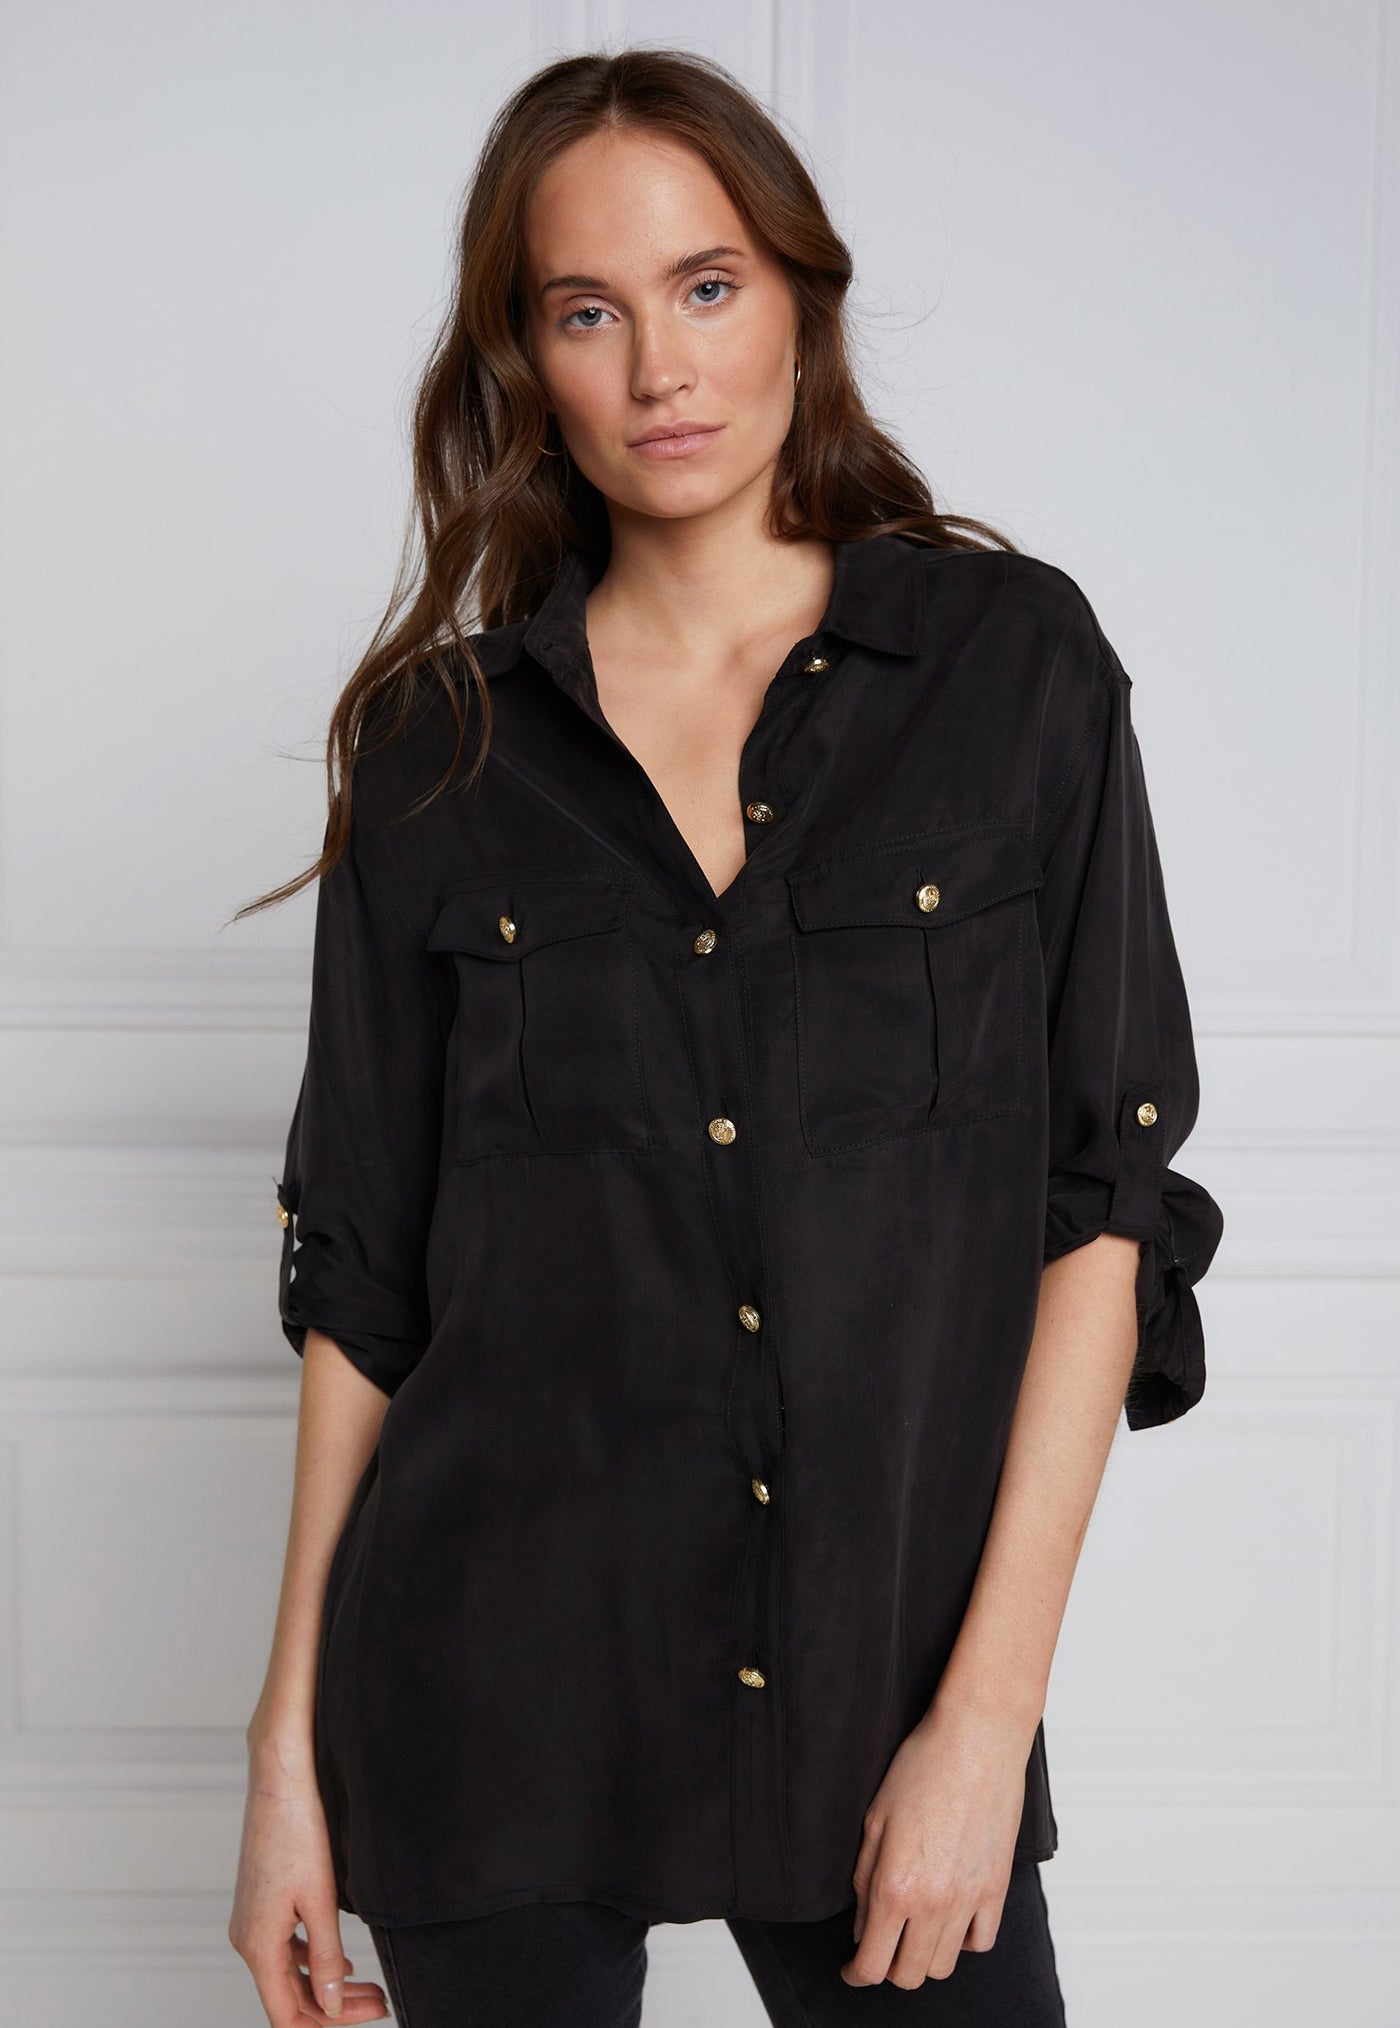 Relaxed Fit Military Shirt - Black sold by Angel Divine